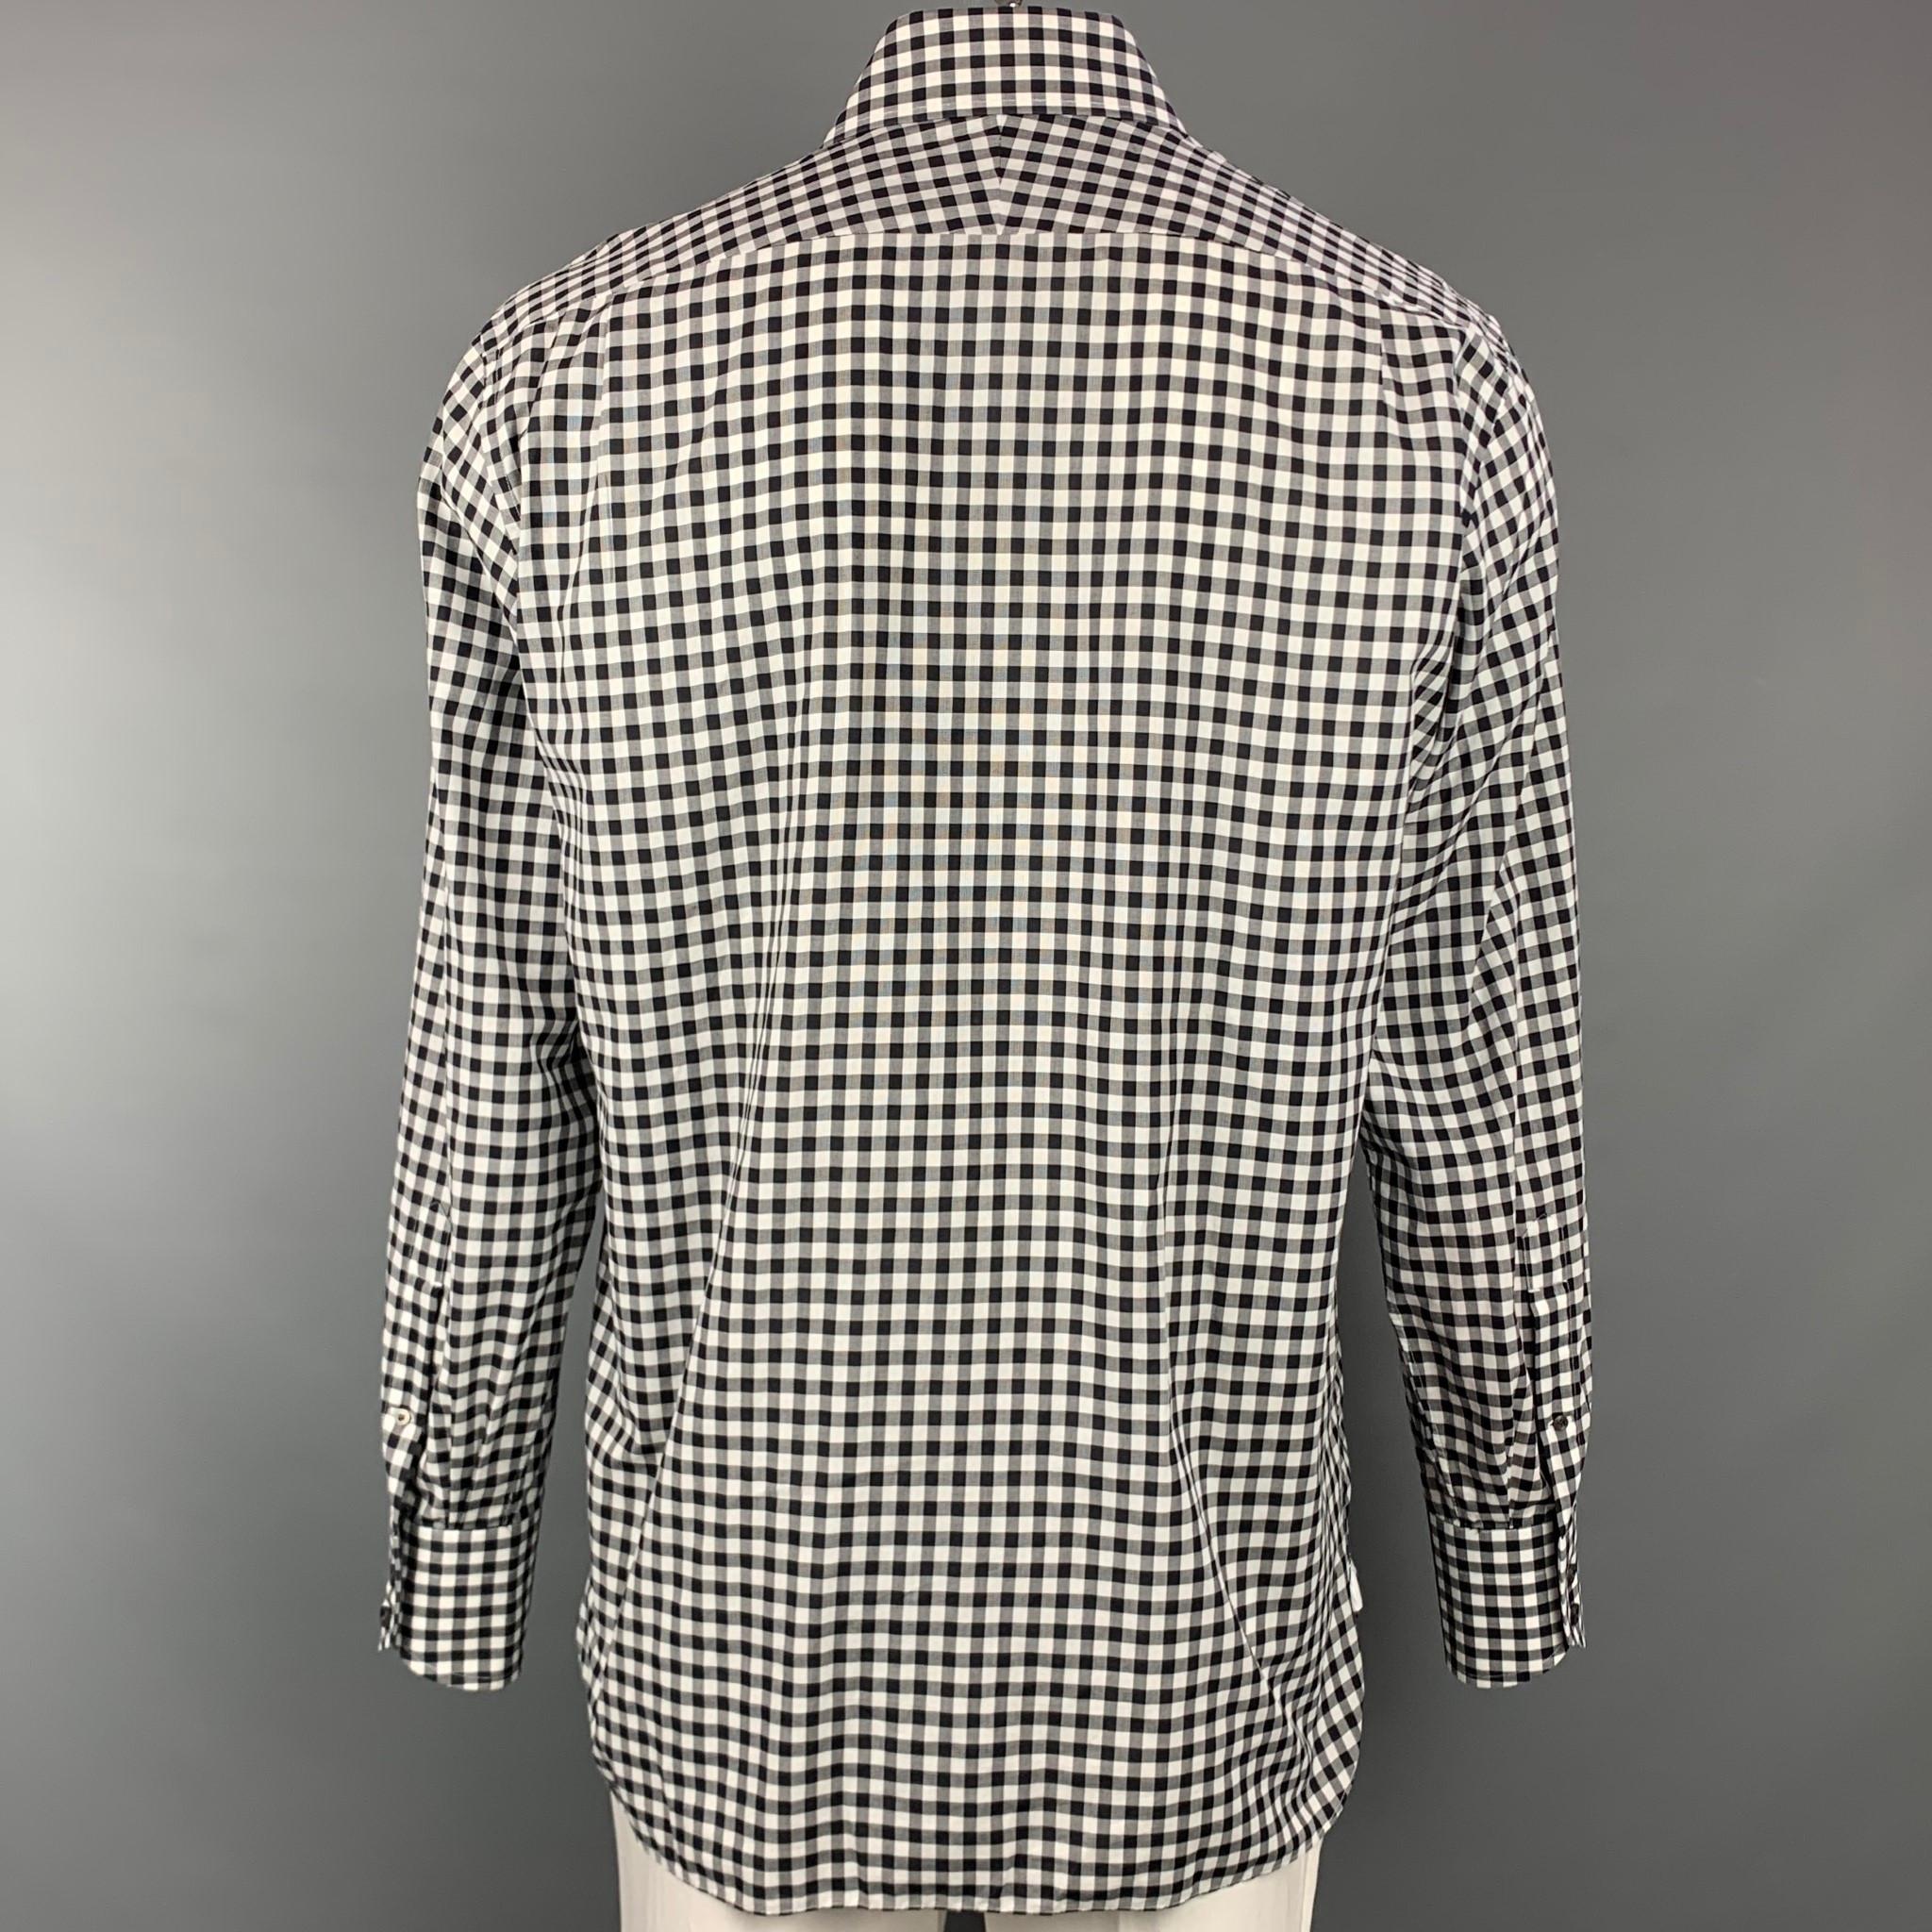 TOM FORD long sleeve shirt comes in a black & white checkered cotton featuring a button up style and a spread collar. Made in Italy.

Very Good Pre-Owned Condition.
Marked: 43/17

Measurements:

Shoulder: 19.5 in.
Chest: 46 in.
Sleeve: 27